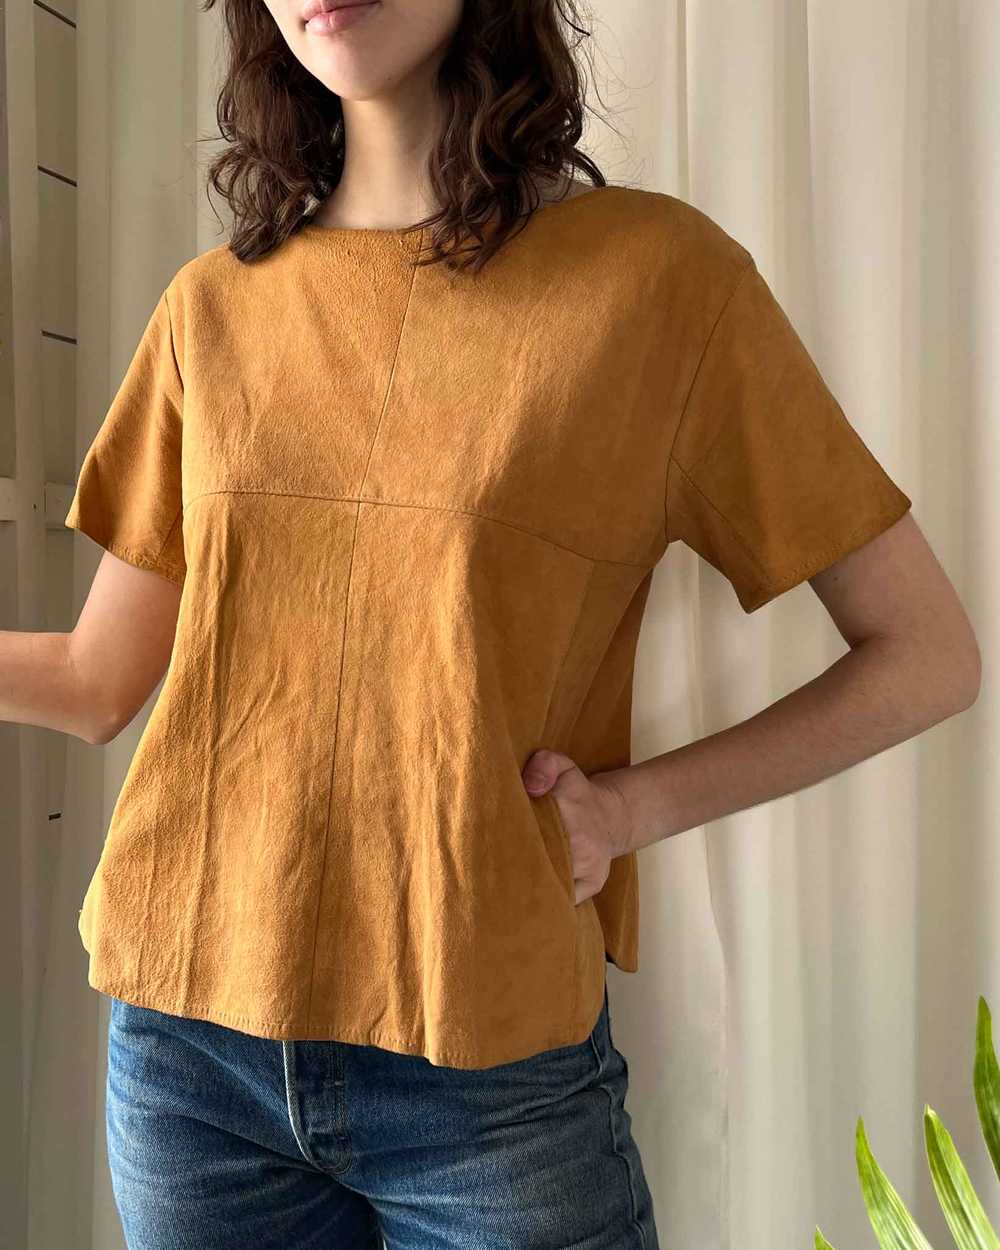 90s Soft Suede Leather Top - image 3